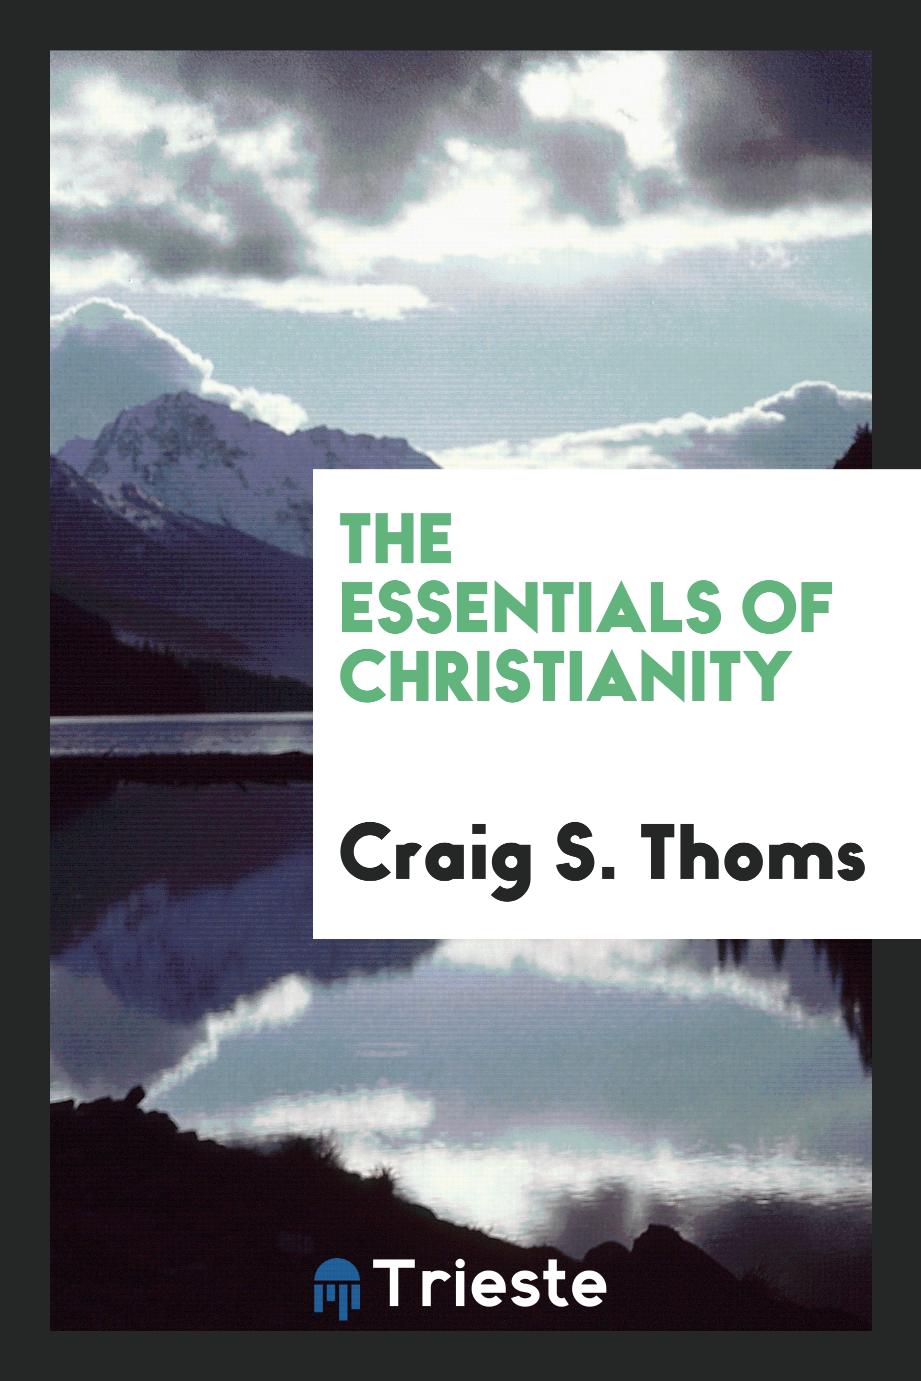 The essentials of Christianity